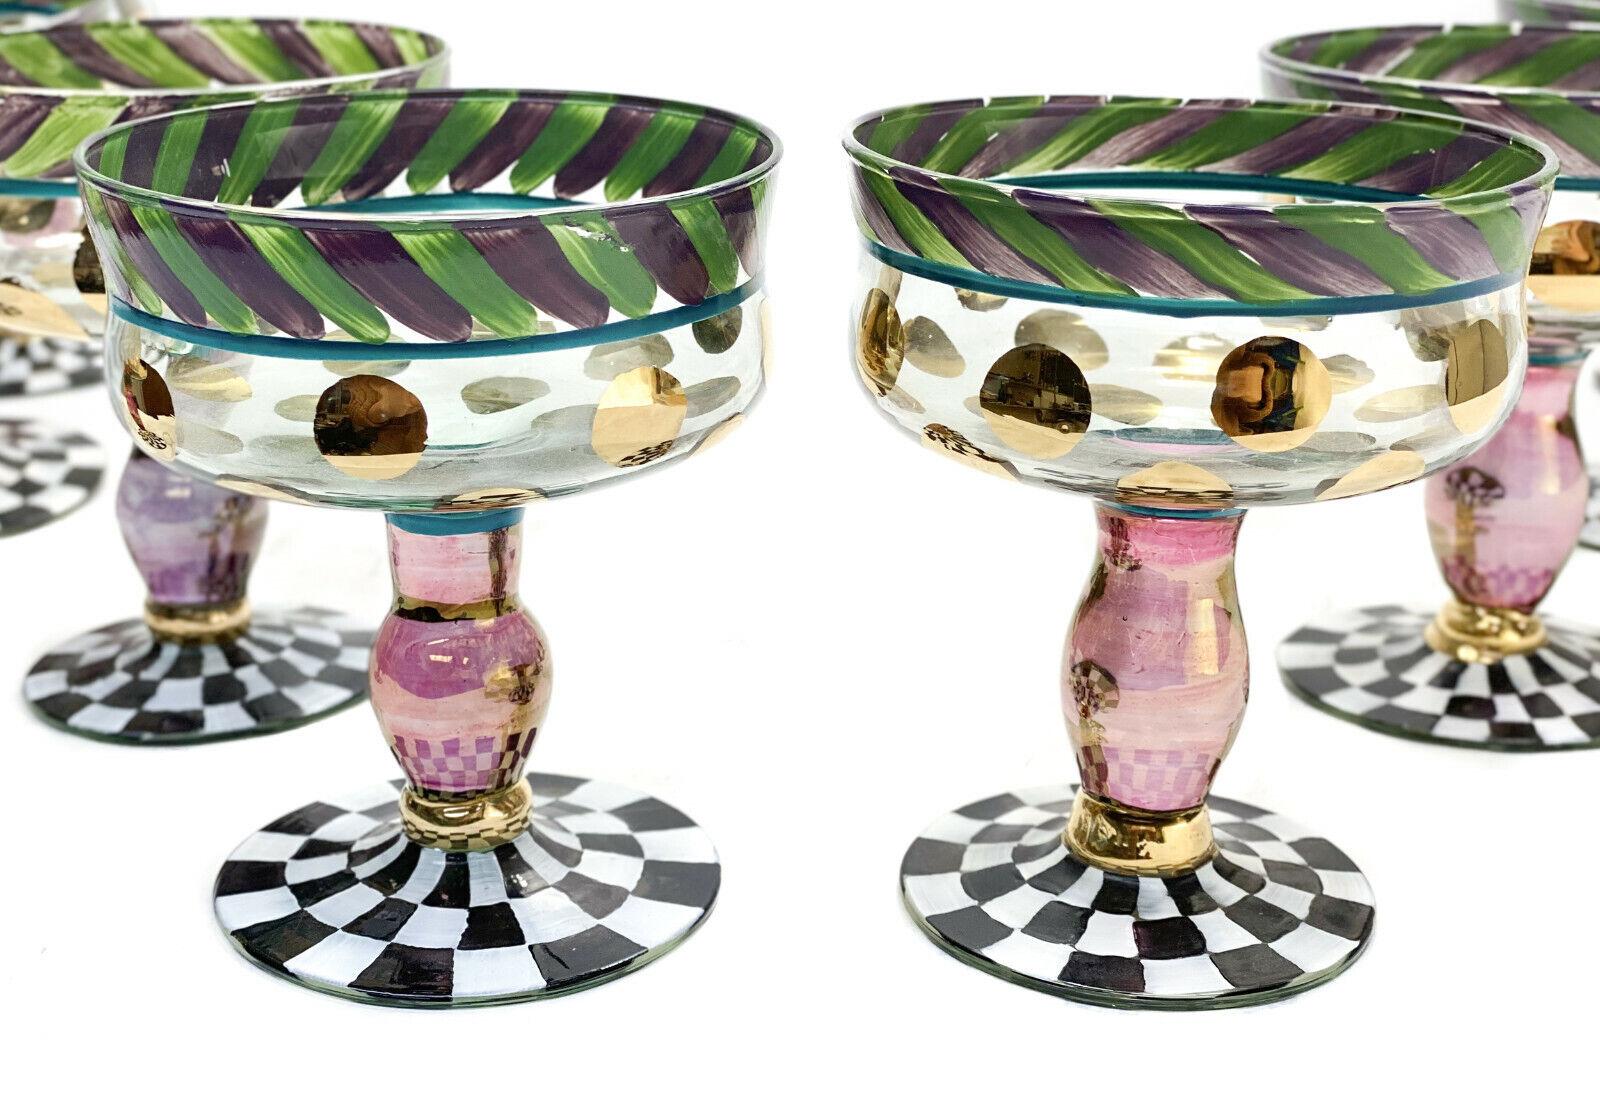 9 MacKenzie childs glass champagne saucers sherbet goblets in circus everydae

Hand painted green and purple stripes to the top rim with a black and white checkered base. Large gold polka dots to the body with a cranberry red gold iridescent stem.